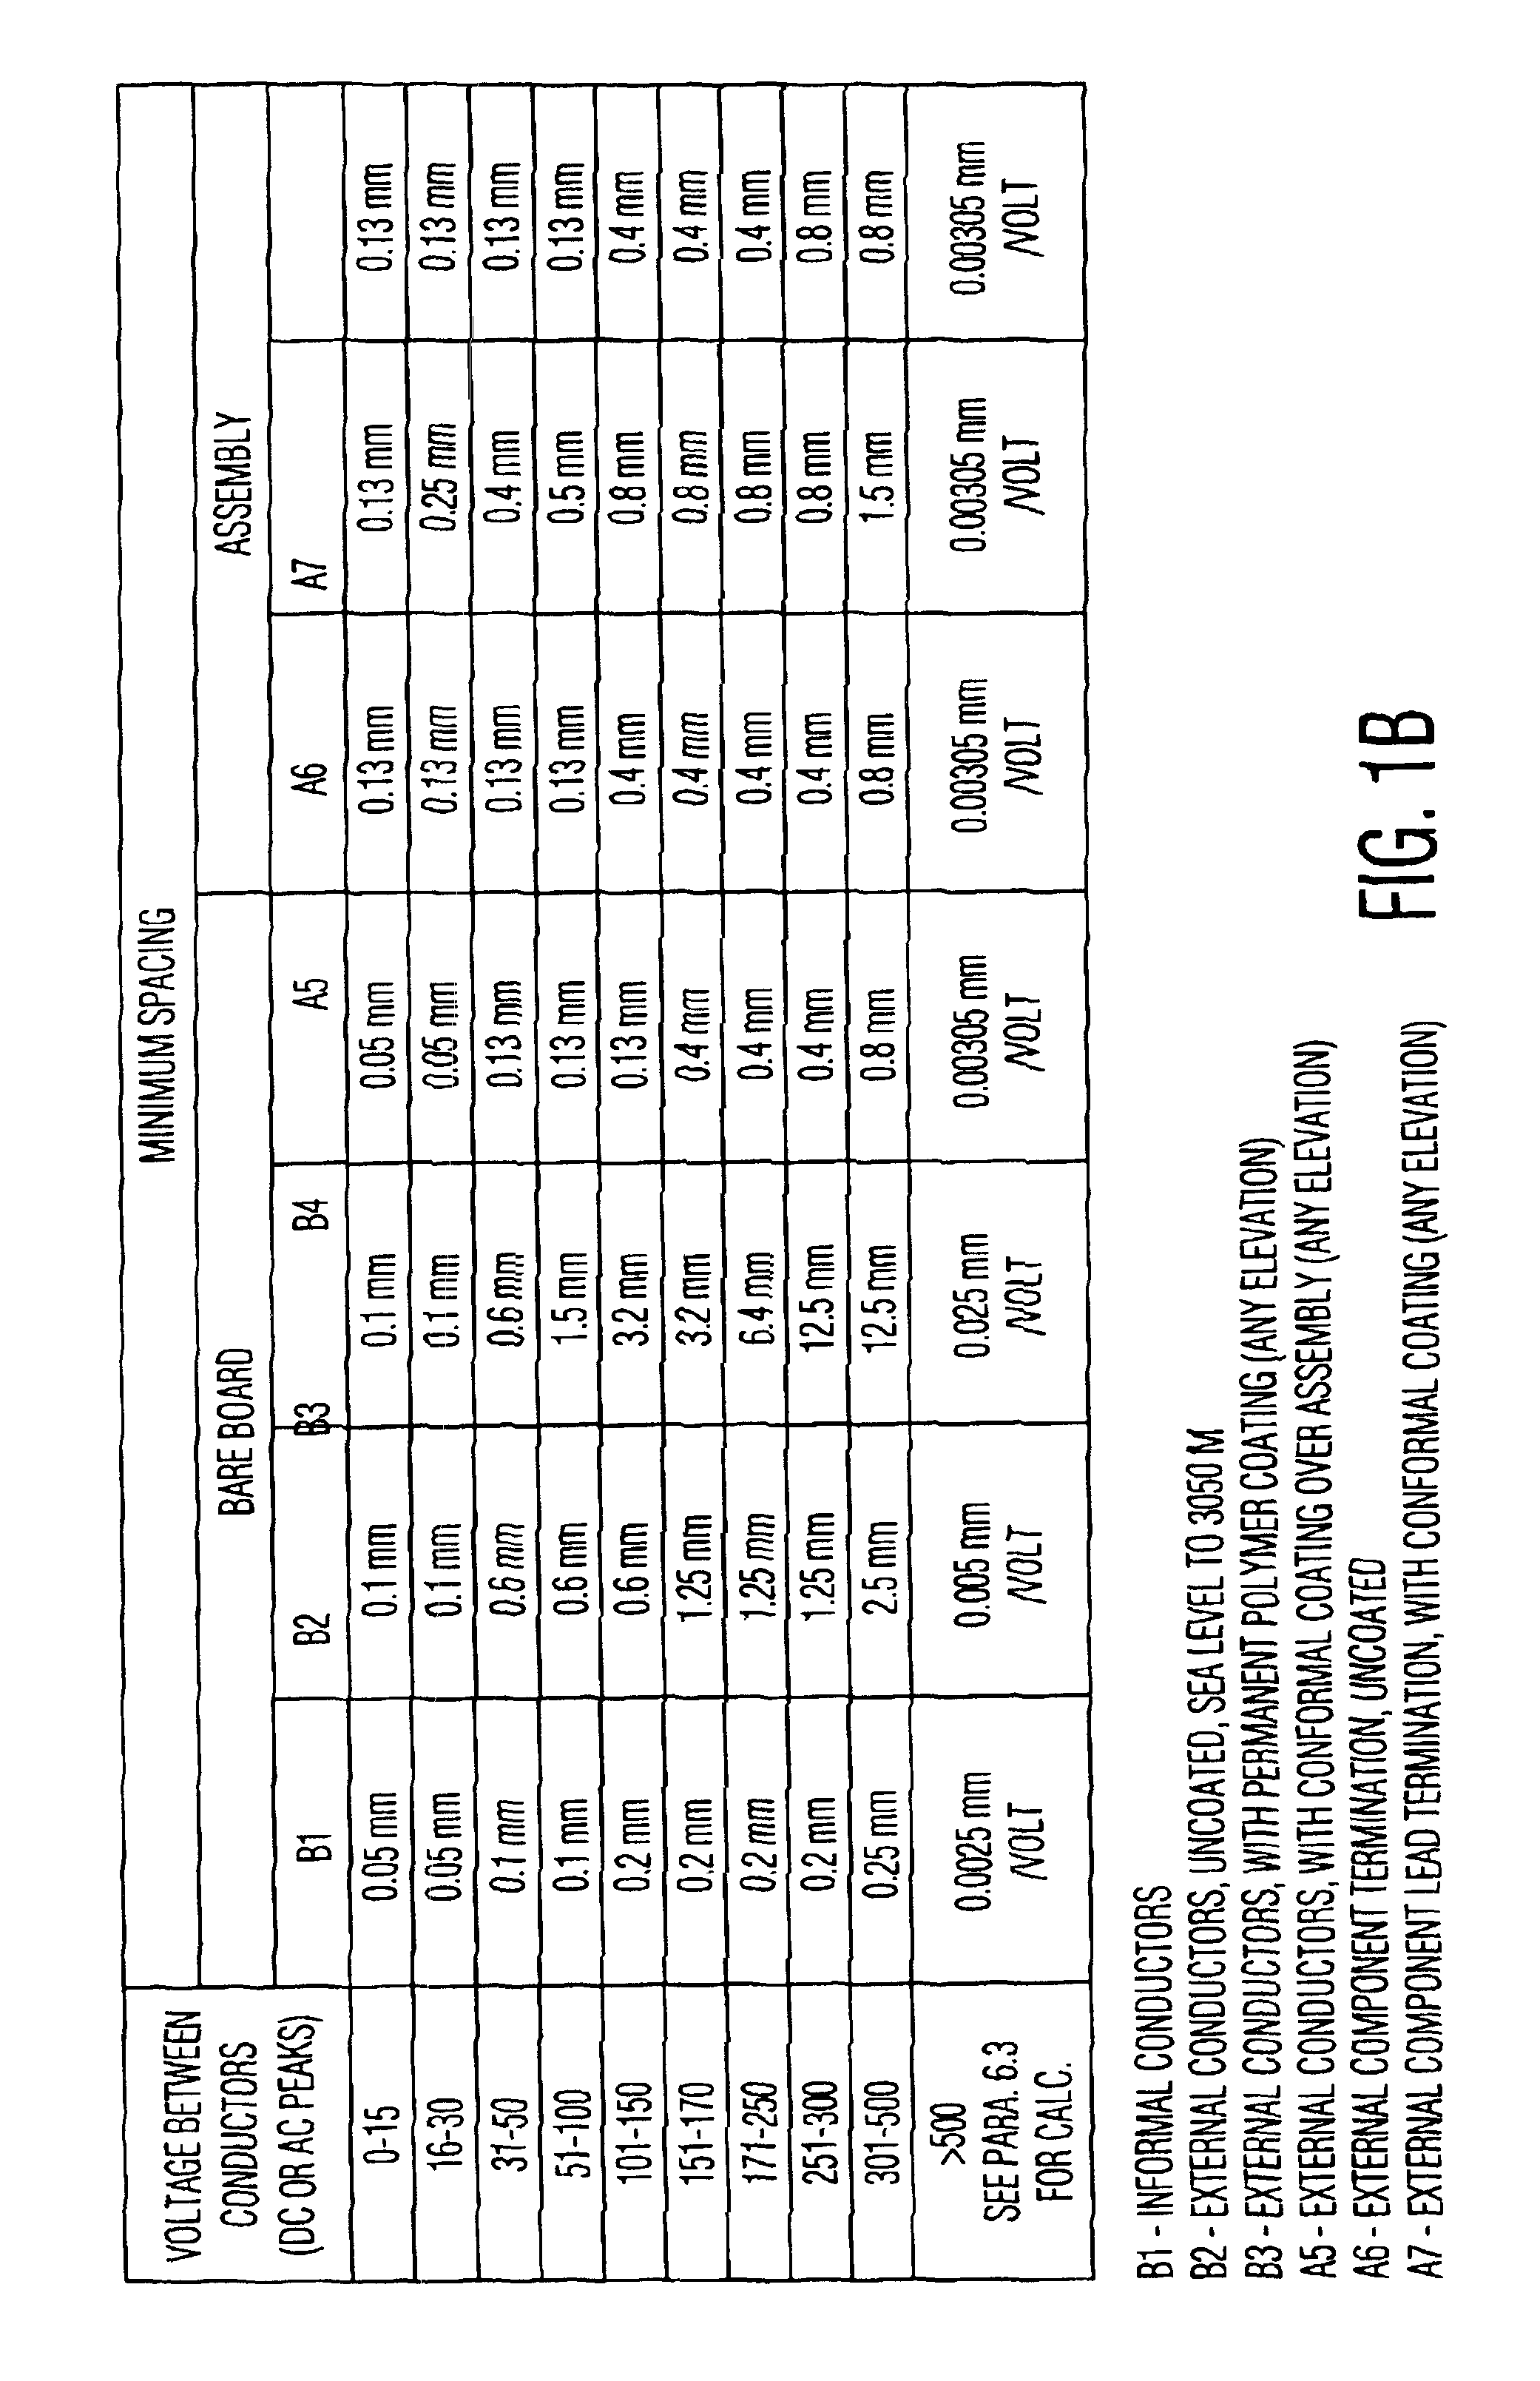 Single package containing multiple integrated circuit devices